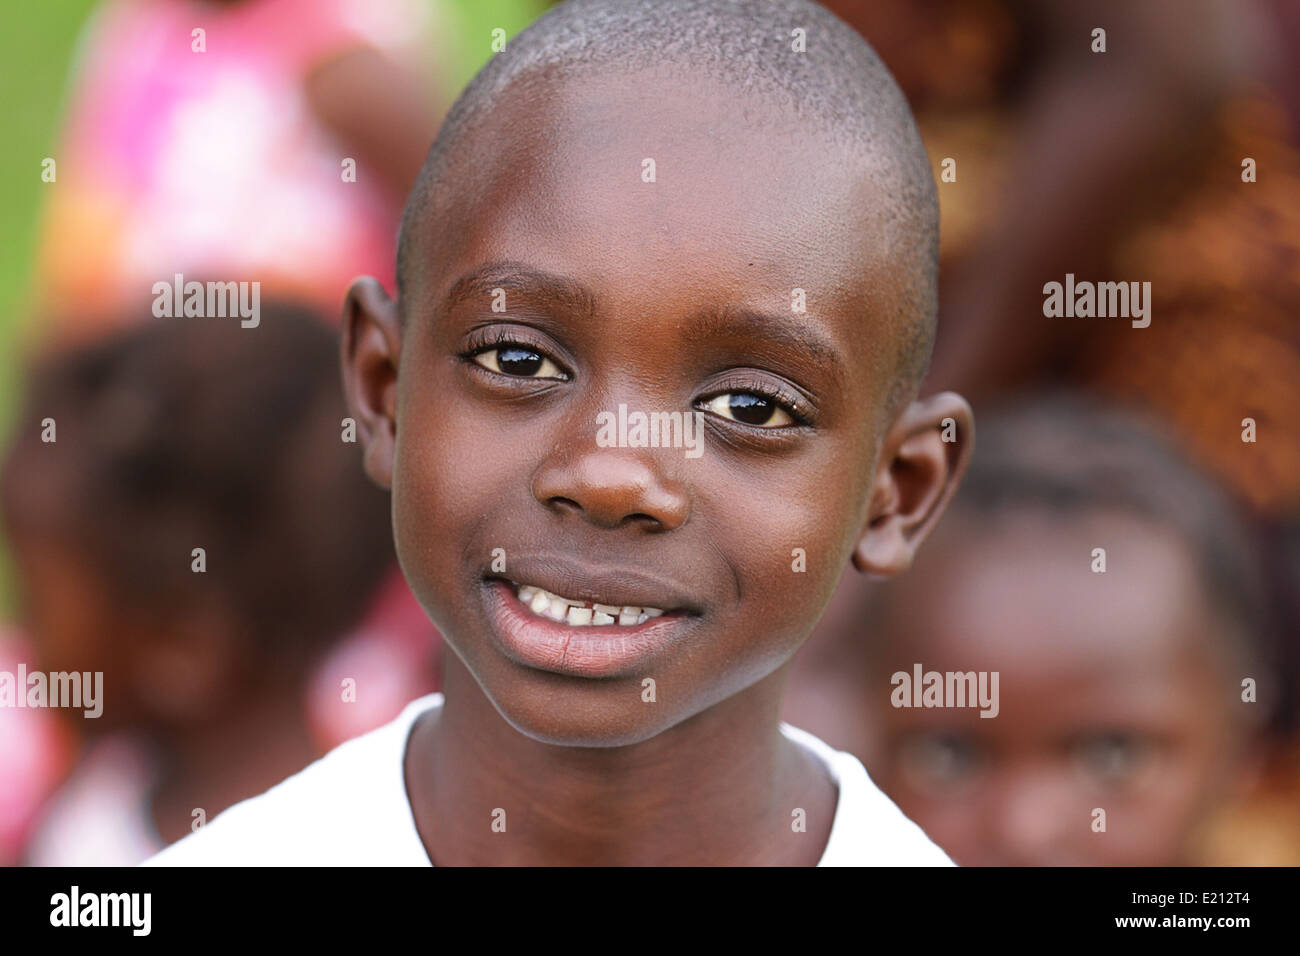 A smiling Zambian orphan boy stands out from faces in the background. Stock Photo